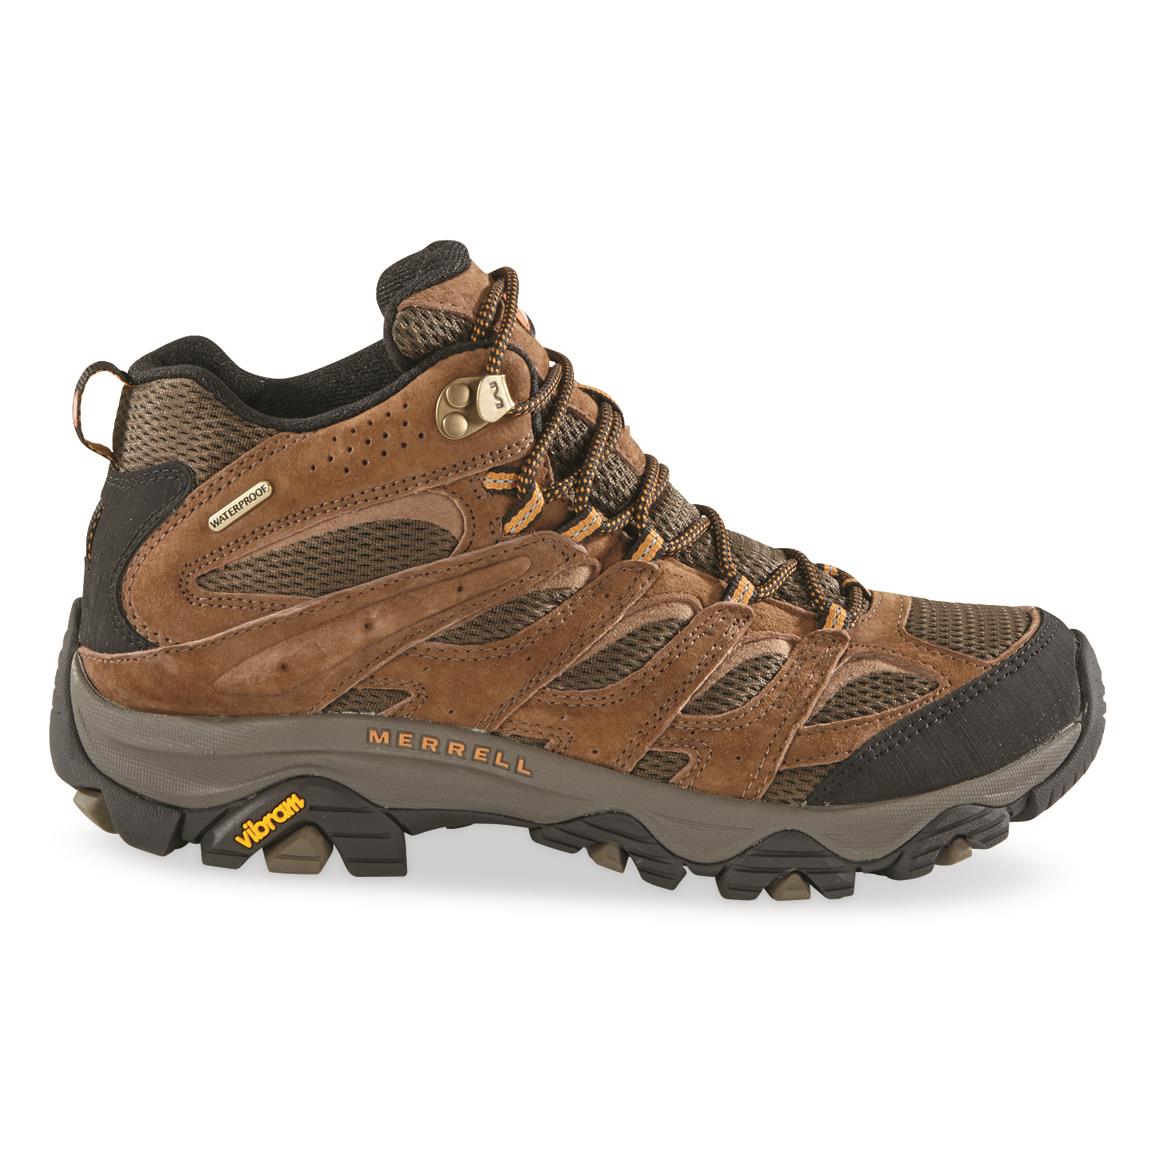 KEEN Hiking Boots & Shoes | Men's Boots & Shoes | Boots & Shoes ...